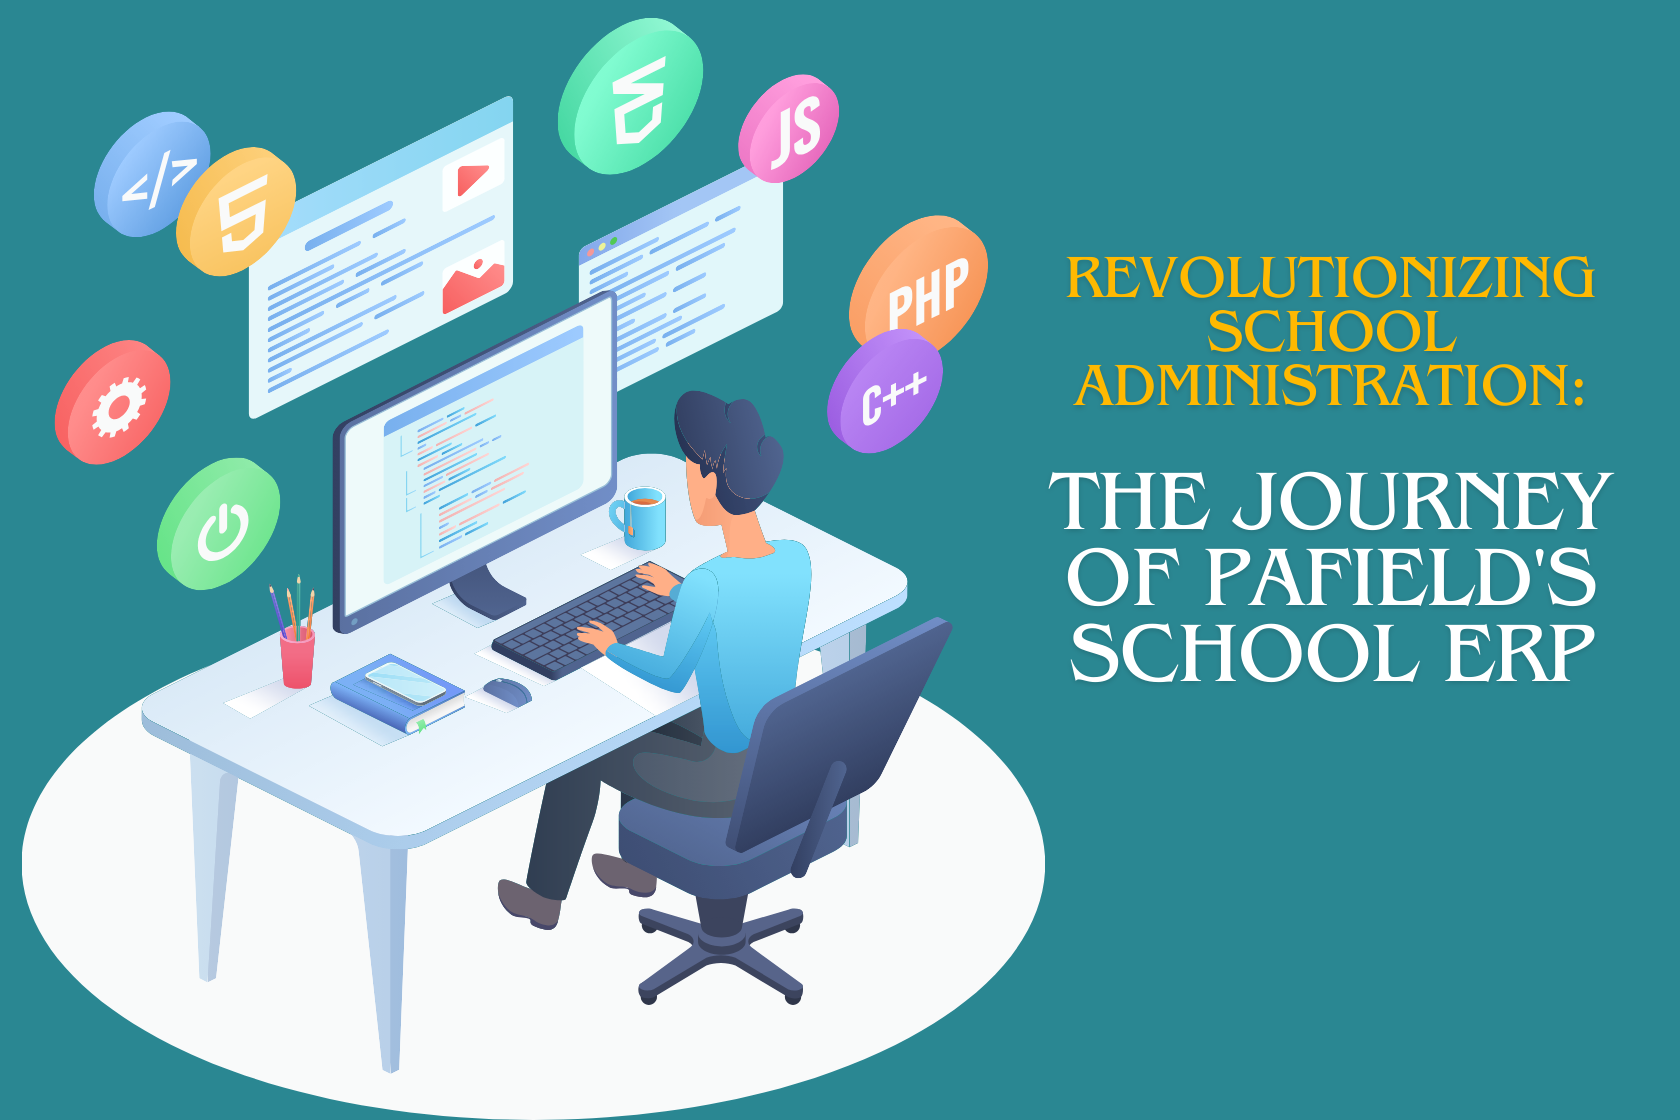 Revolutionizing School Administration The Journey of PAFIELD's School ERP